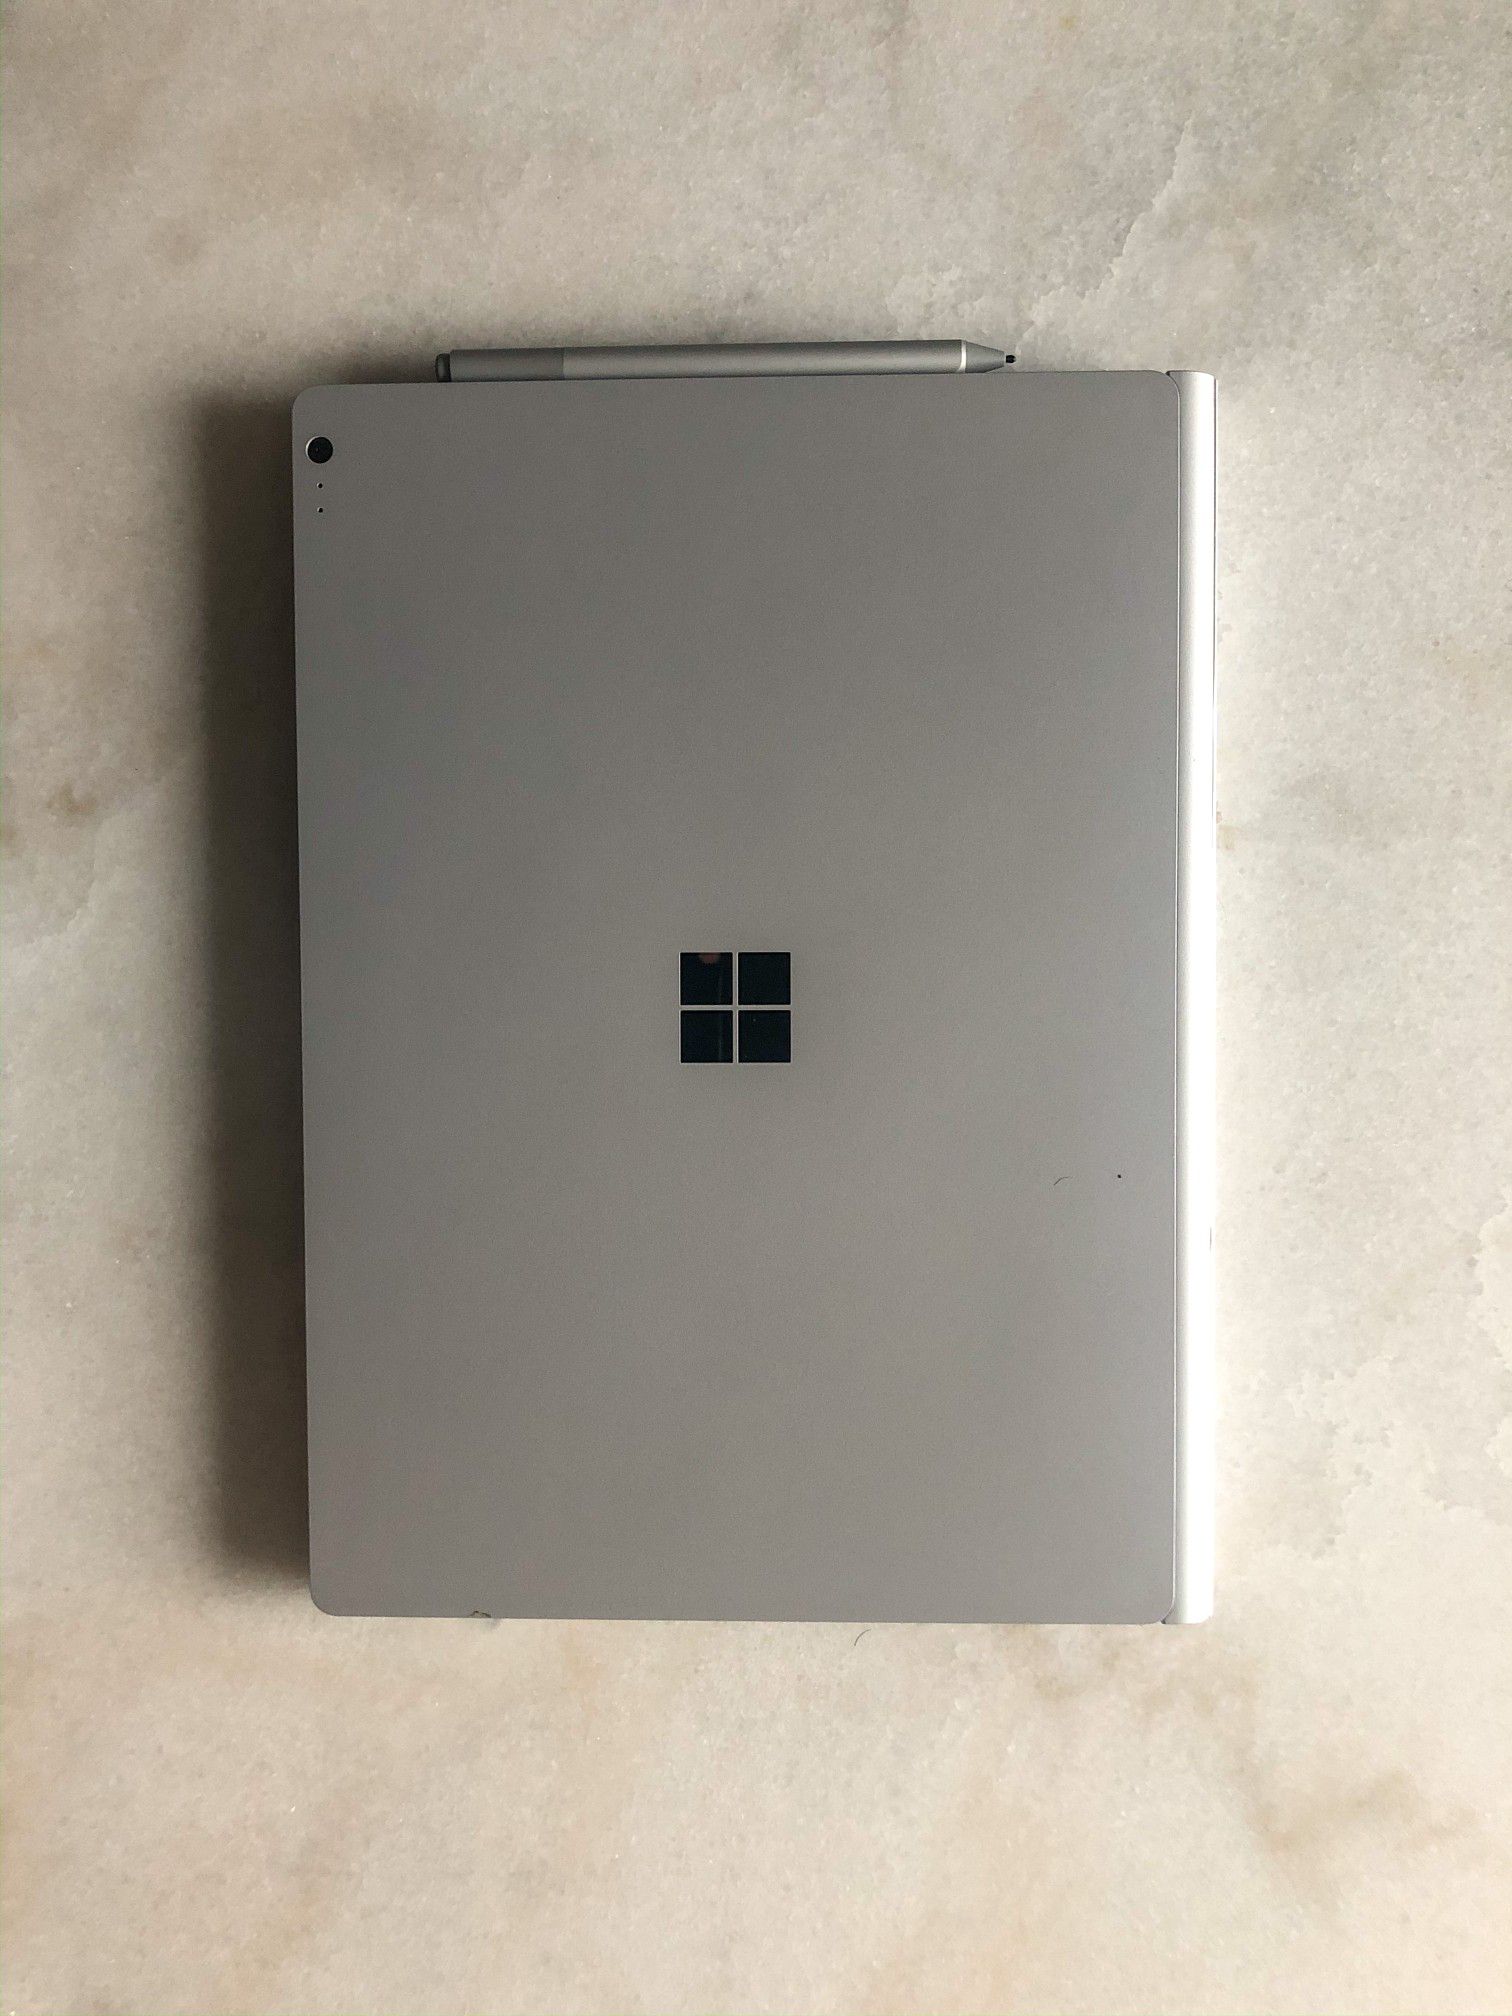 Used Microsoft Surface Book 2 Latest Model